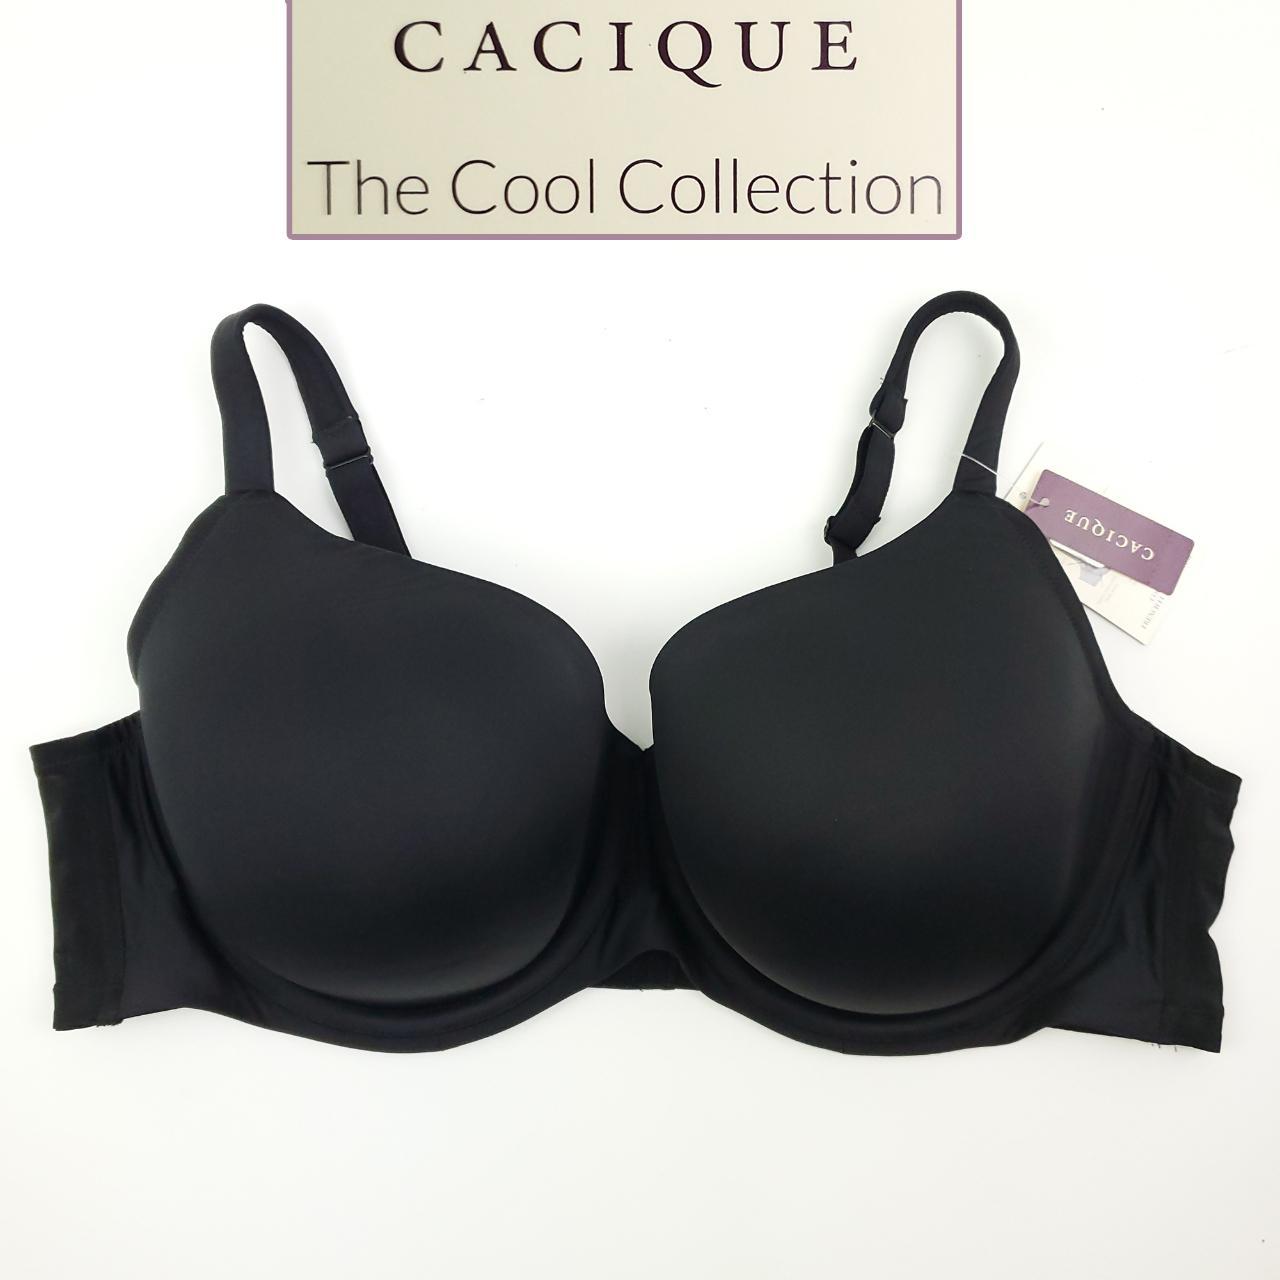 Cacique Cool Collection Bra 46D French Full Coverage - Depop